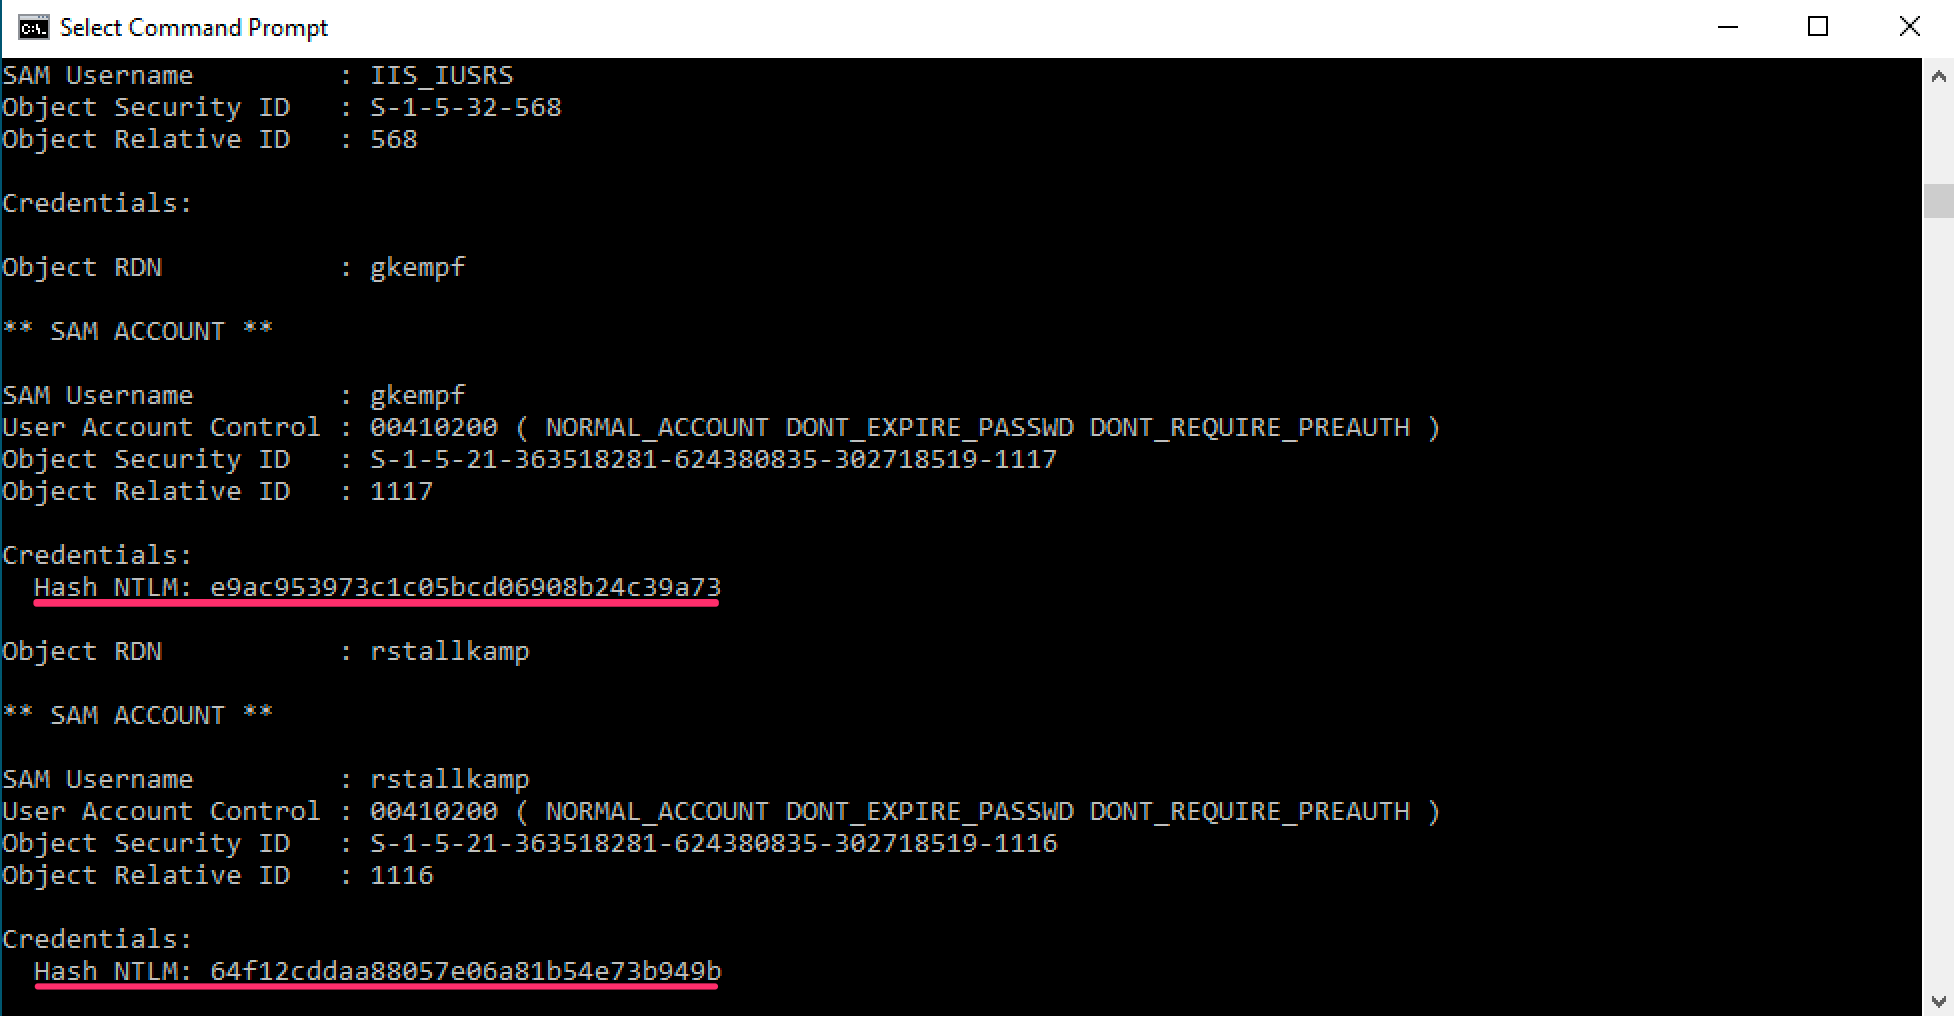 Viewing NTLM password hashes of two Domain users